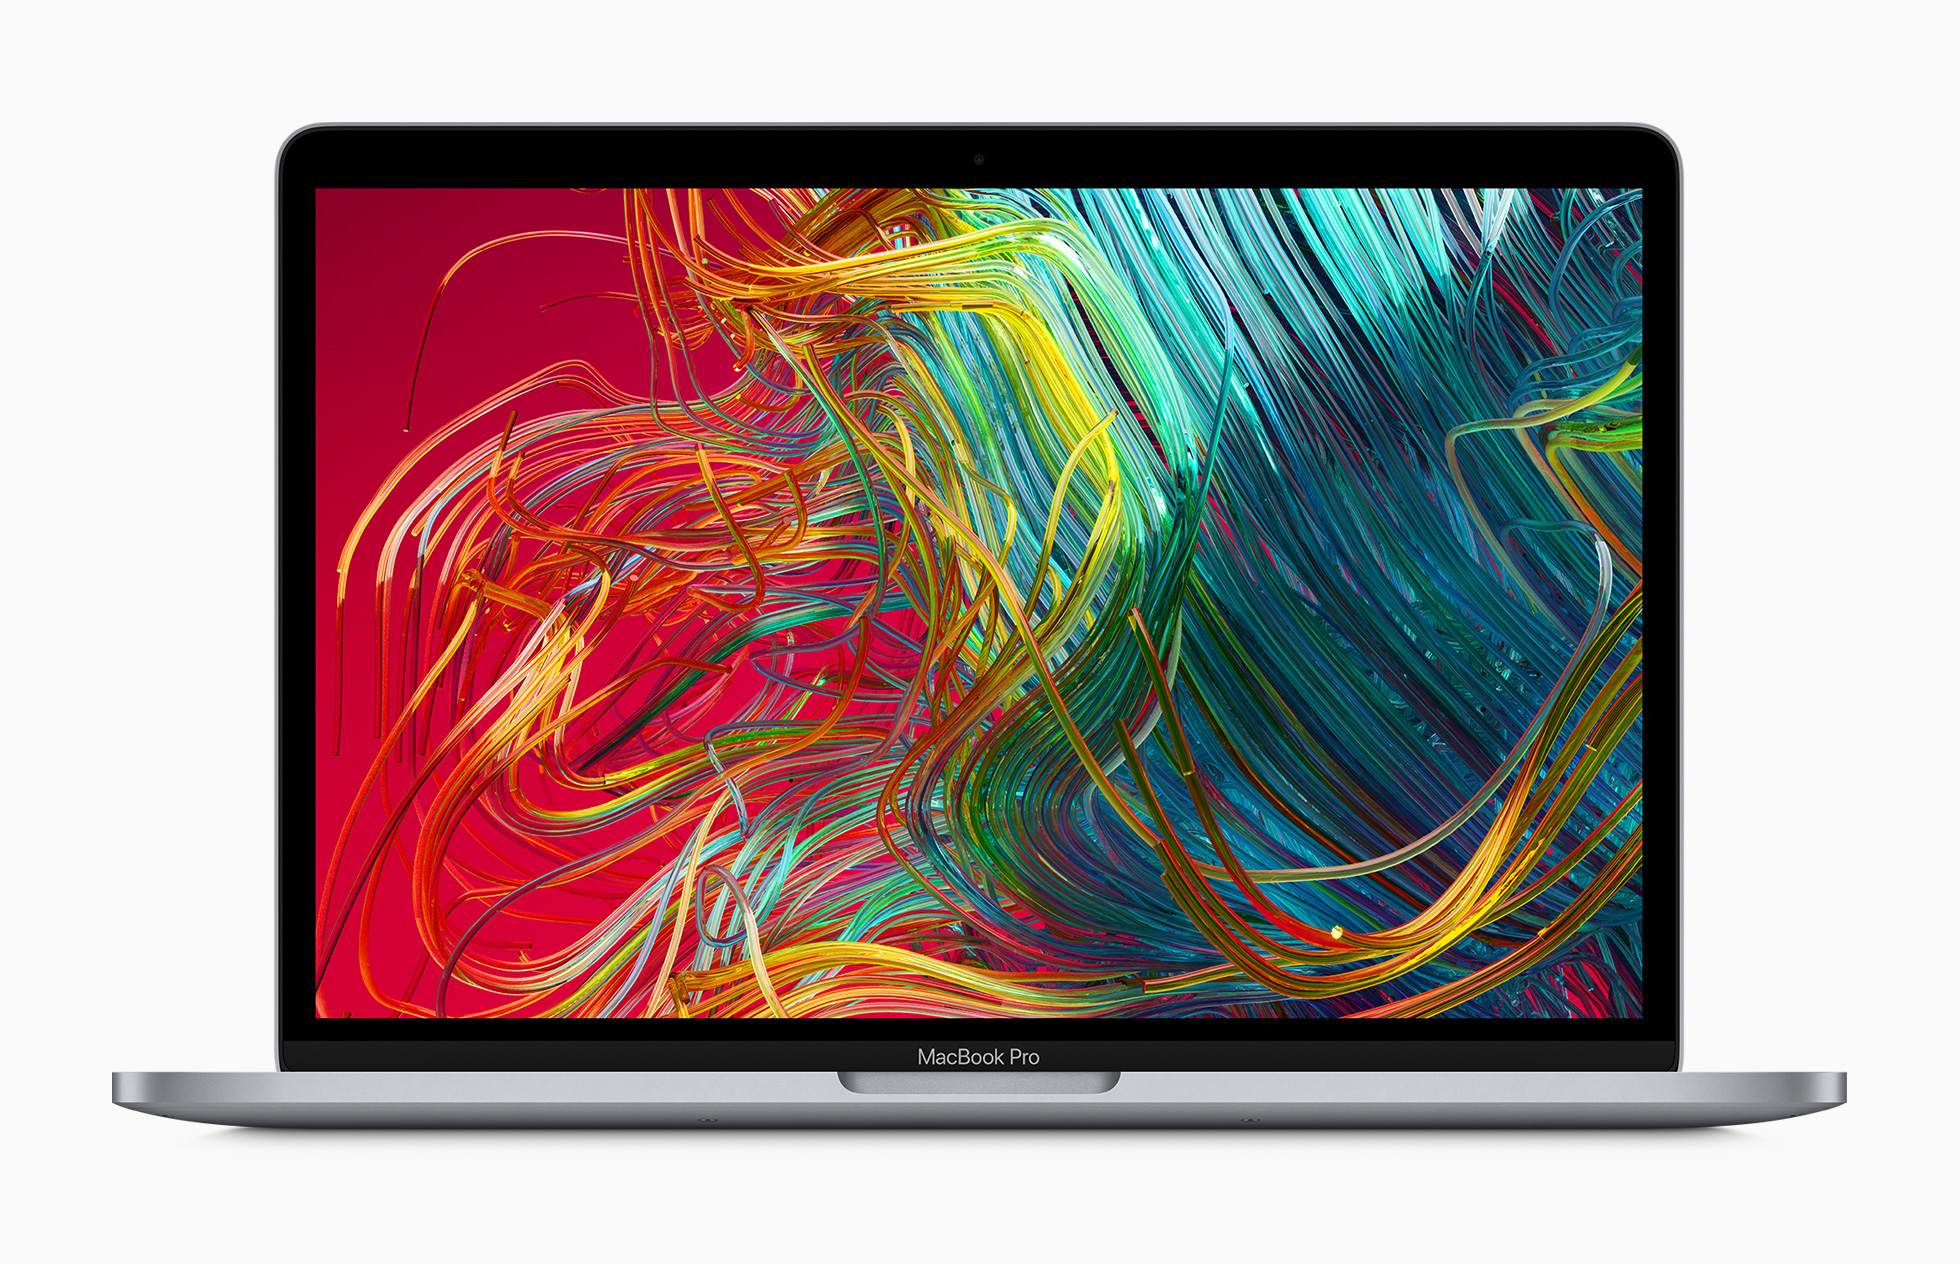 The new MacBook Pro 13 is pretty boring, but still very good